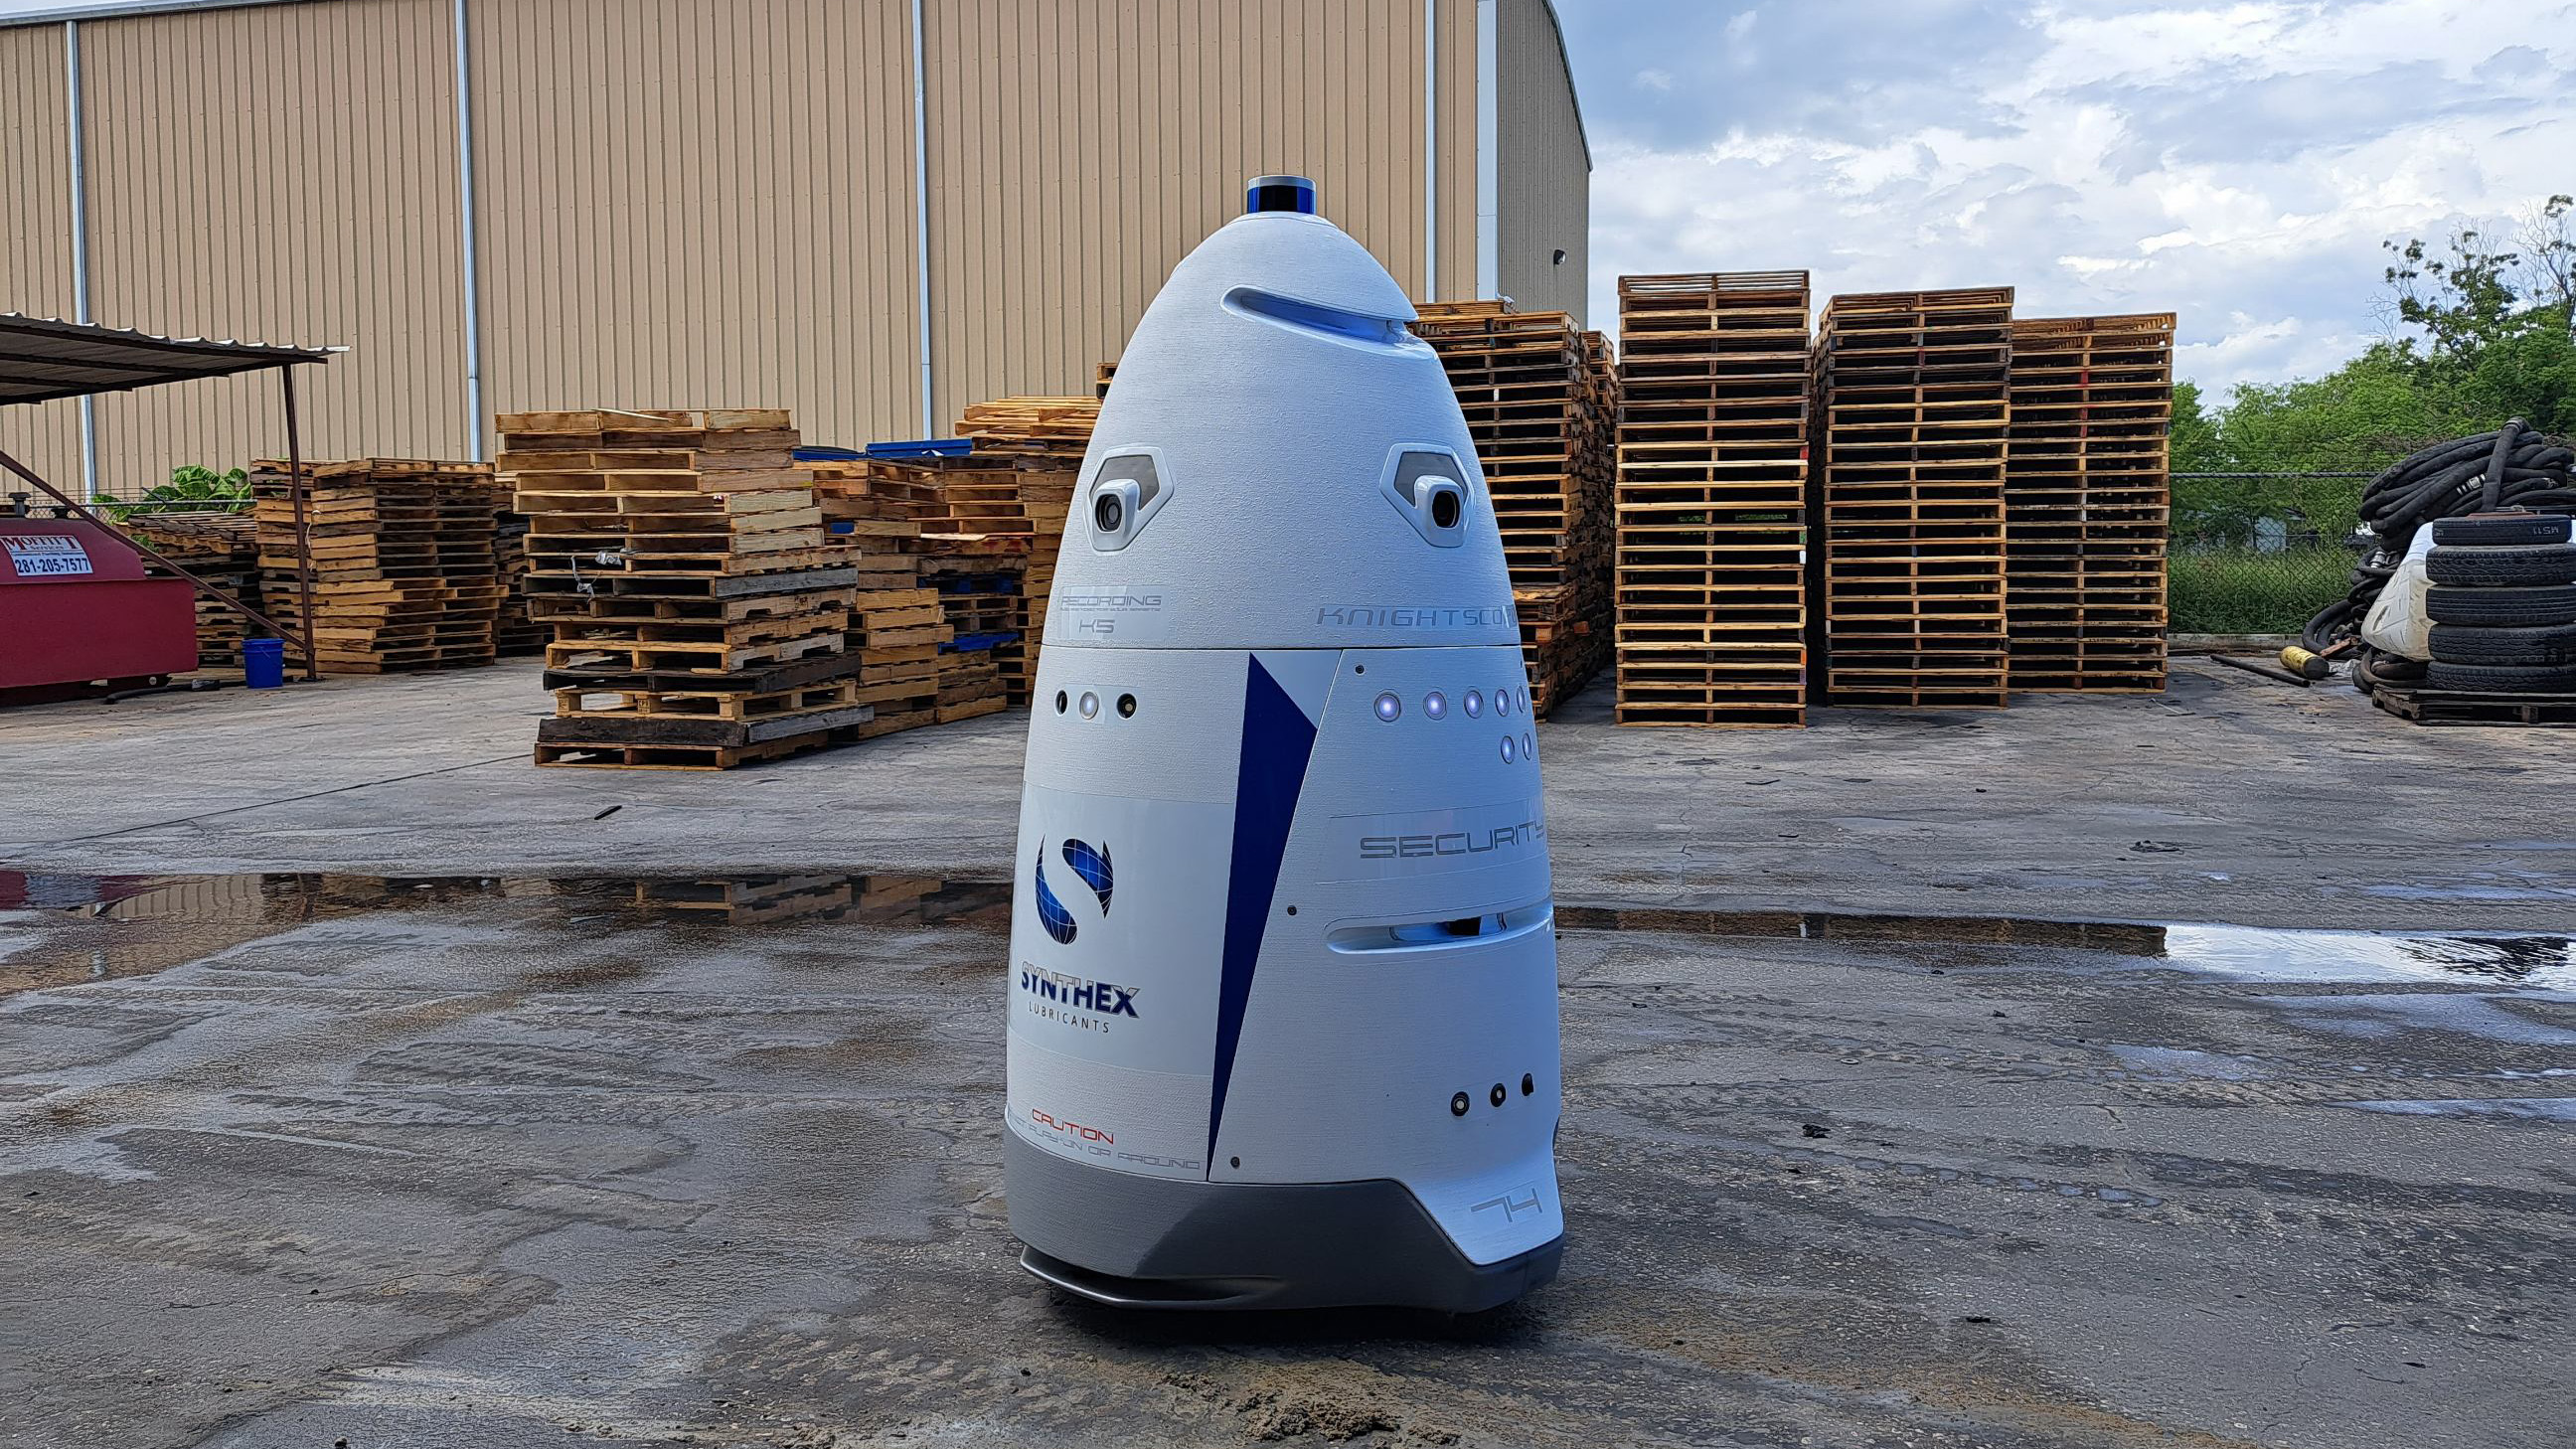 Knightscope (Nasdaq: KSCP) Security Robot Reports for Duty at Texas Lubricant Manufacturer